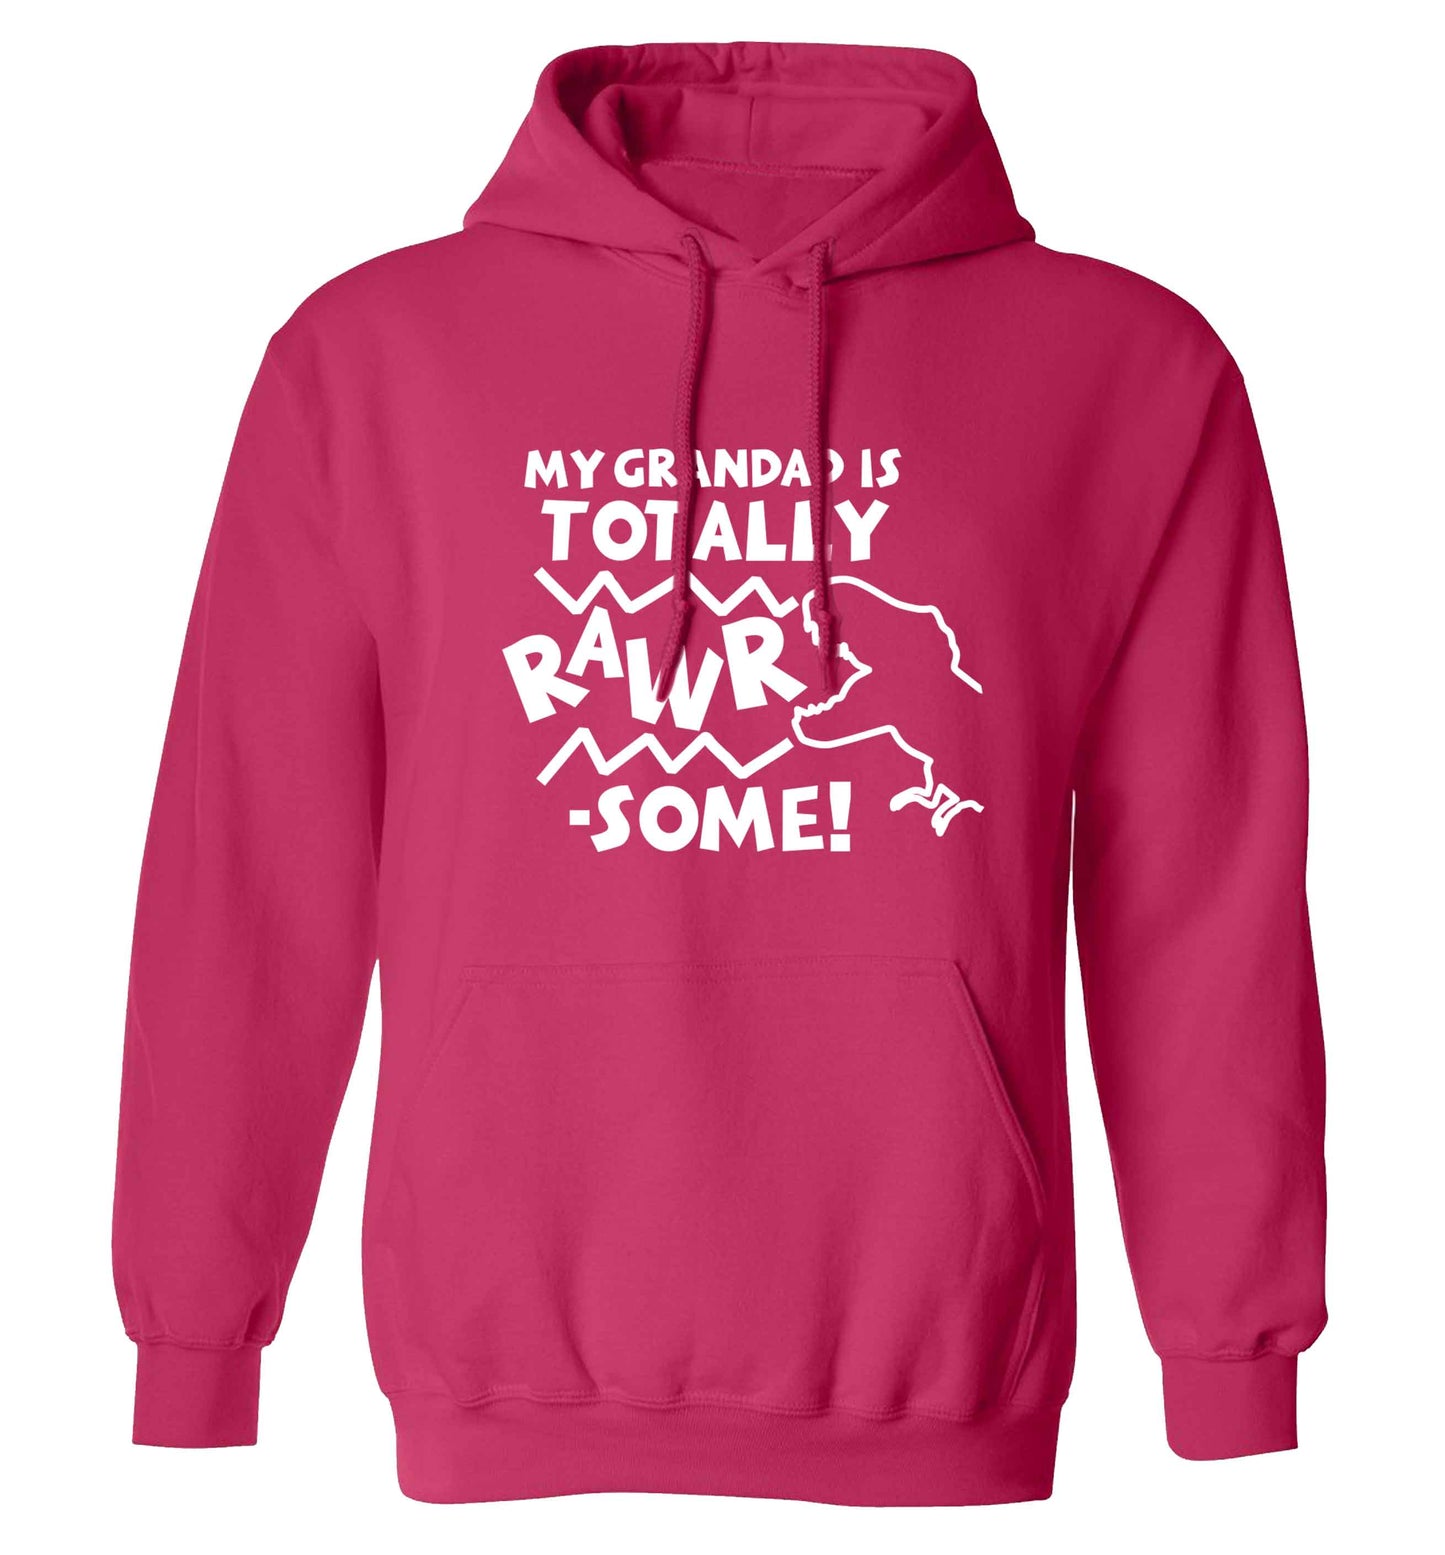 My grandad is totally rawrsome adults unisex pink hoodie 2XL